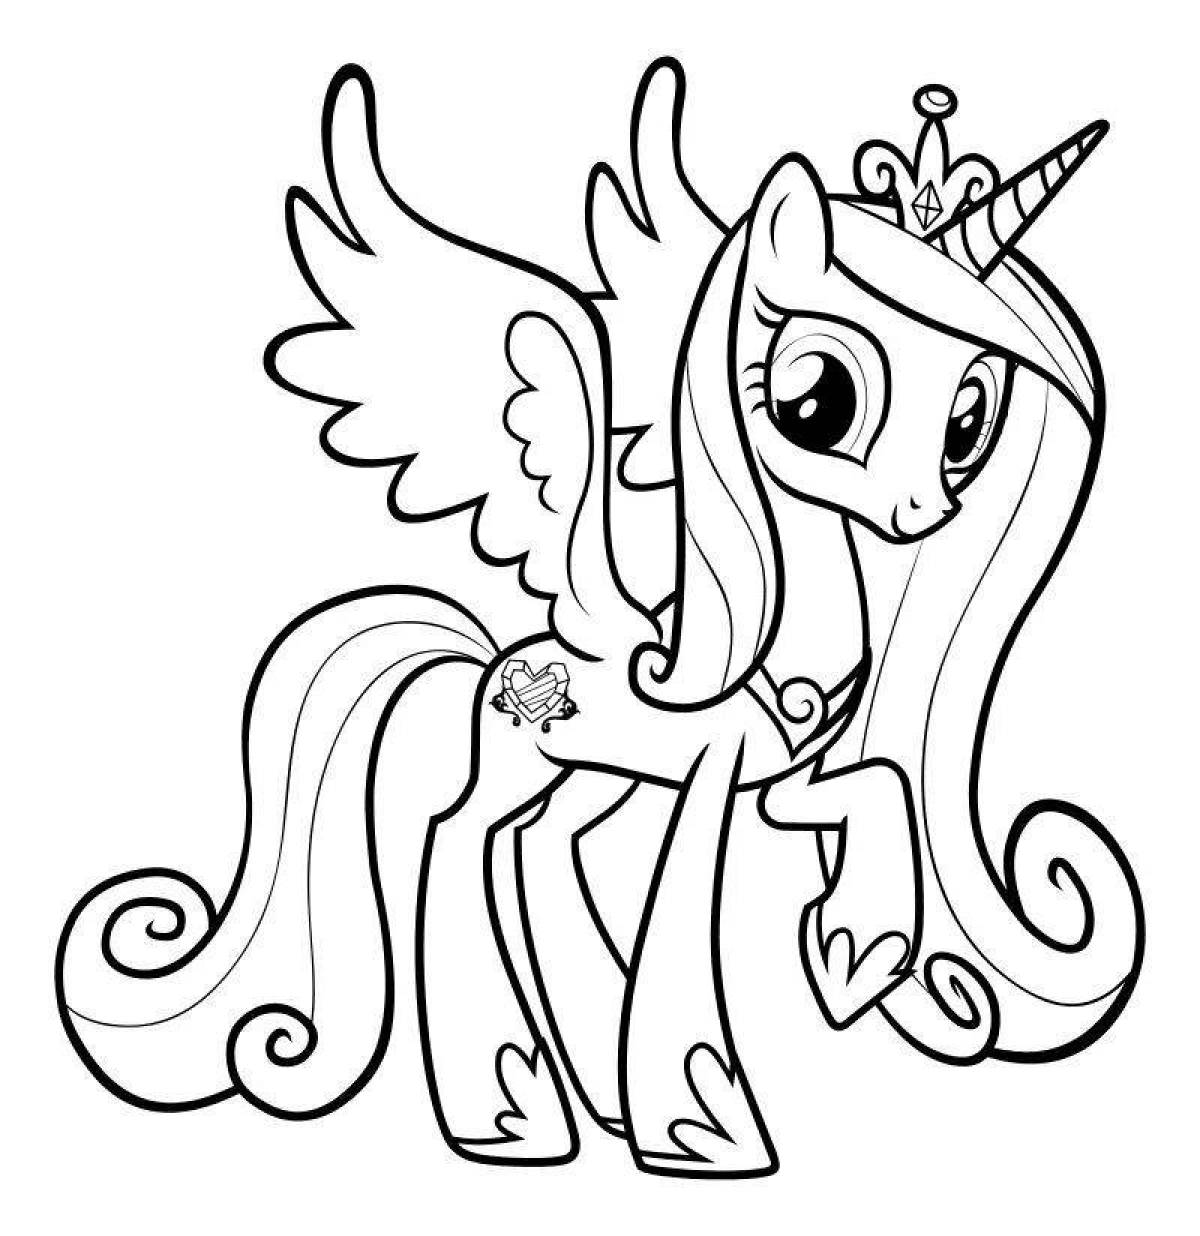 Fascinating little pony coloring book for kids